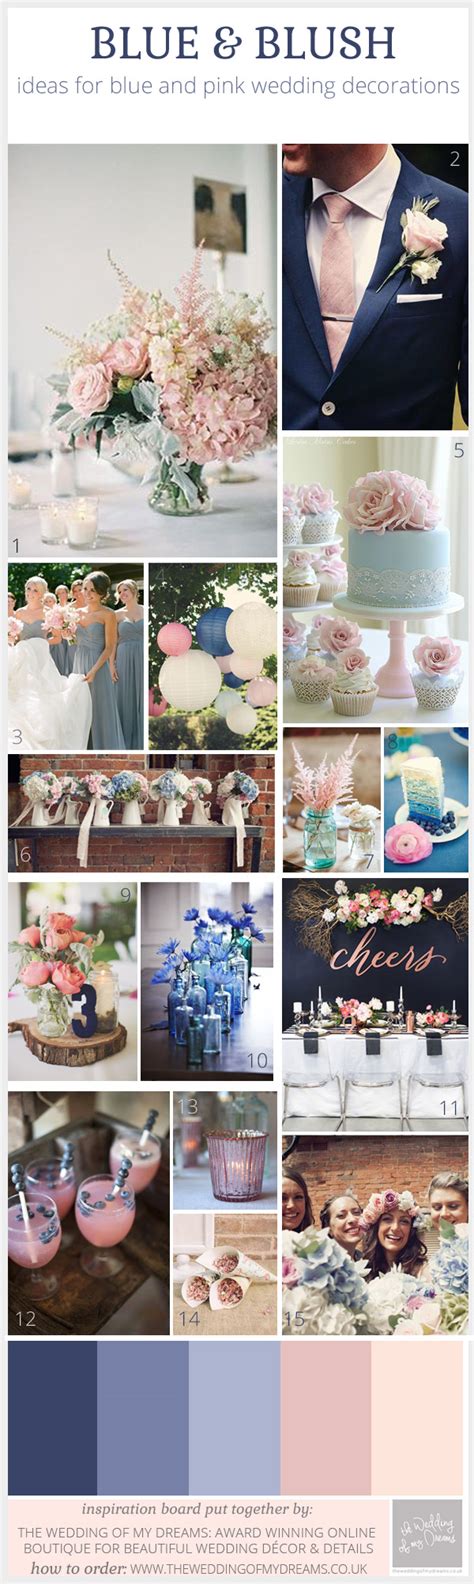 What Are The Popular Wedding Themes For A Navy And Blush Color Combo? Blog | atelier-yuwa.ciao.jp